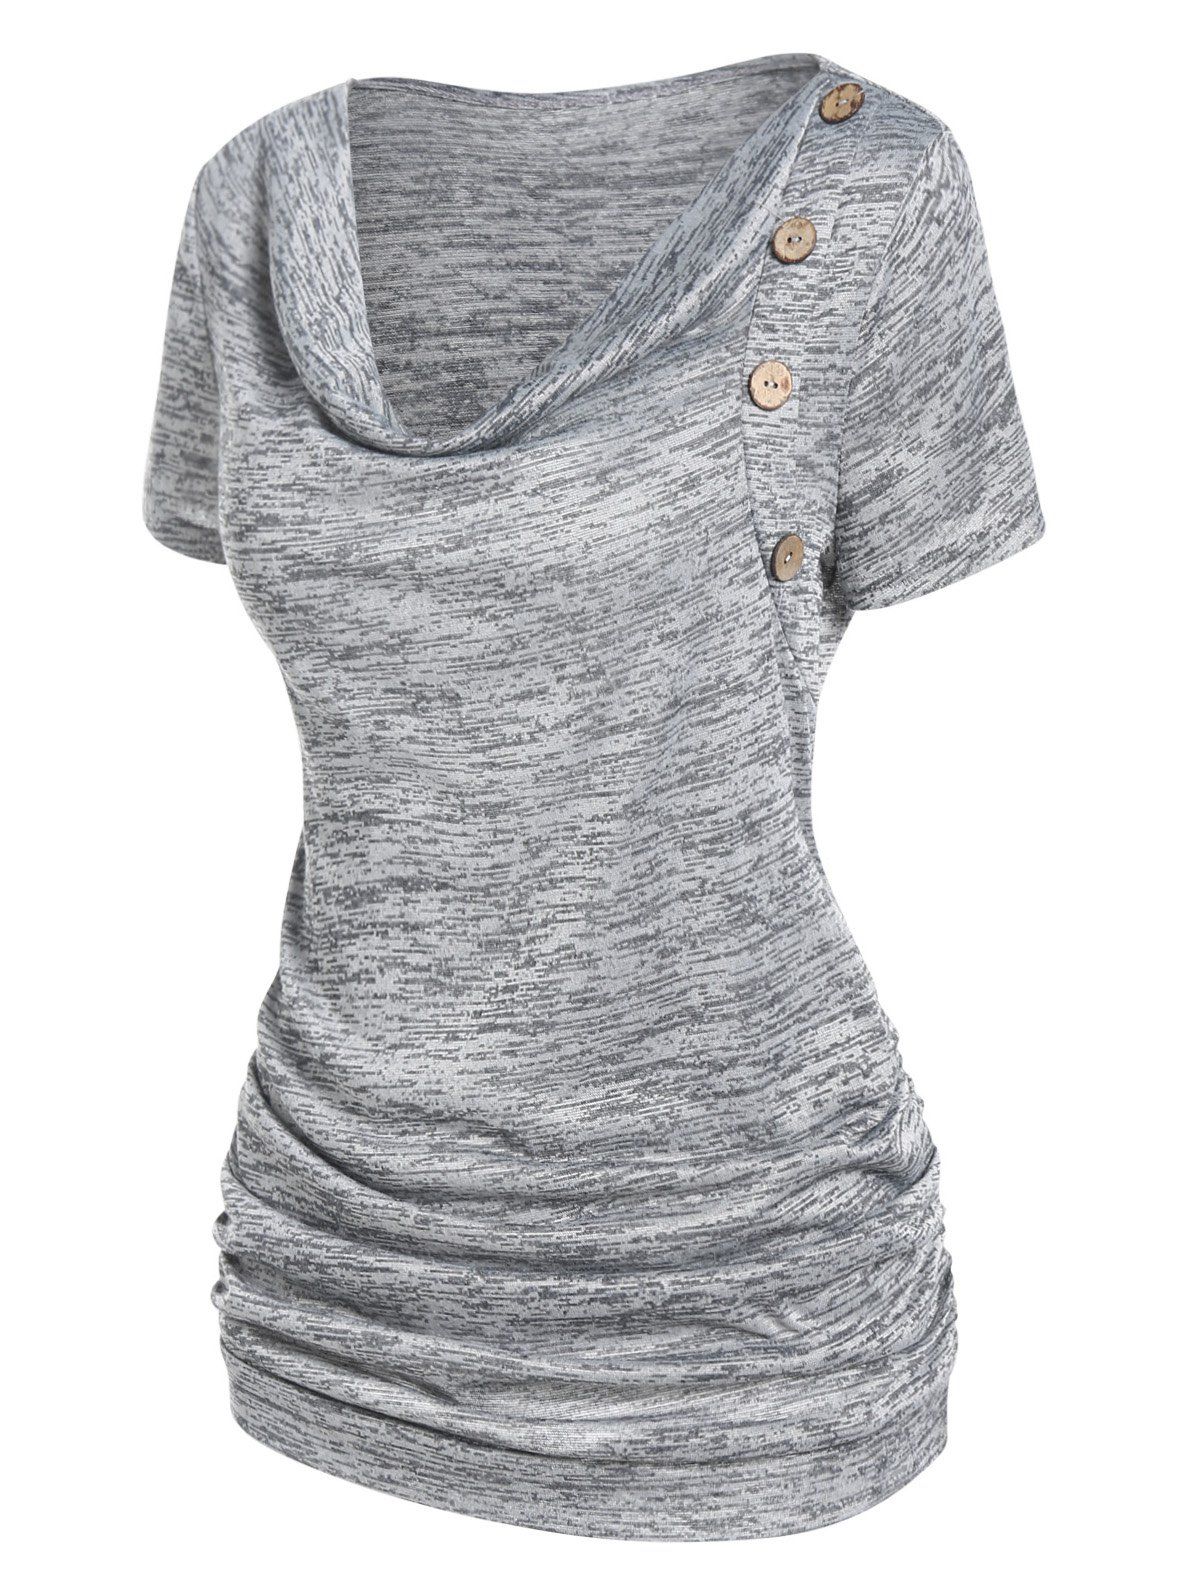 Space Dye Mock Button Ruched Draped Summer Casual T Shirt - GRAY M